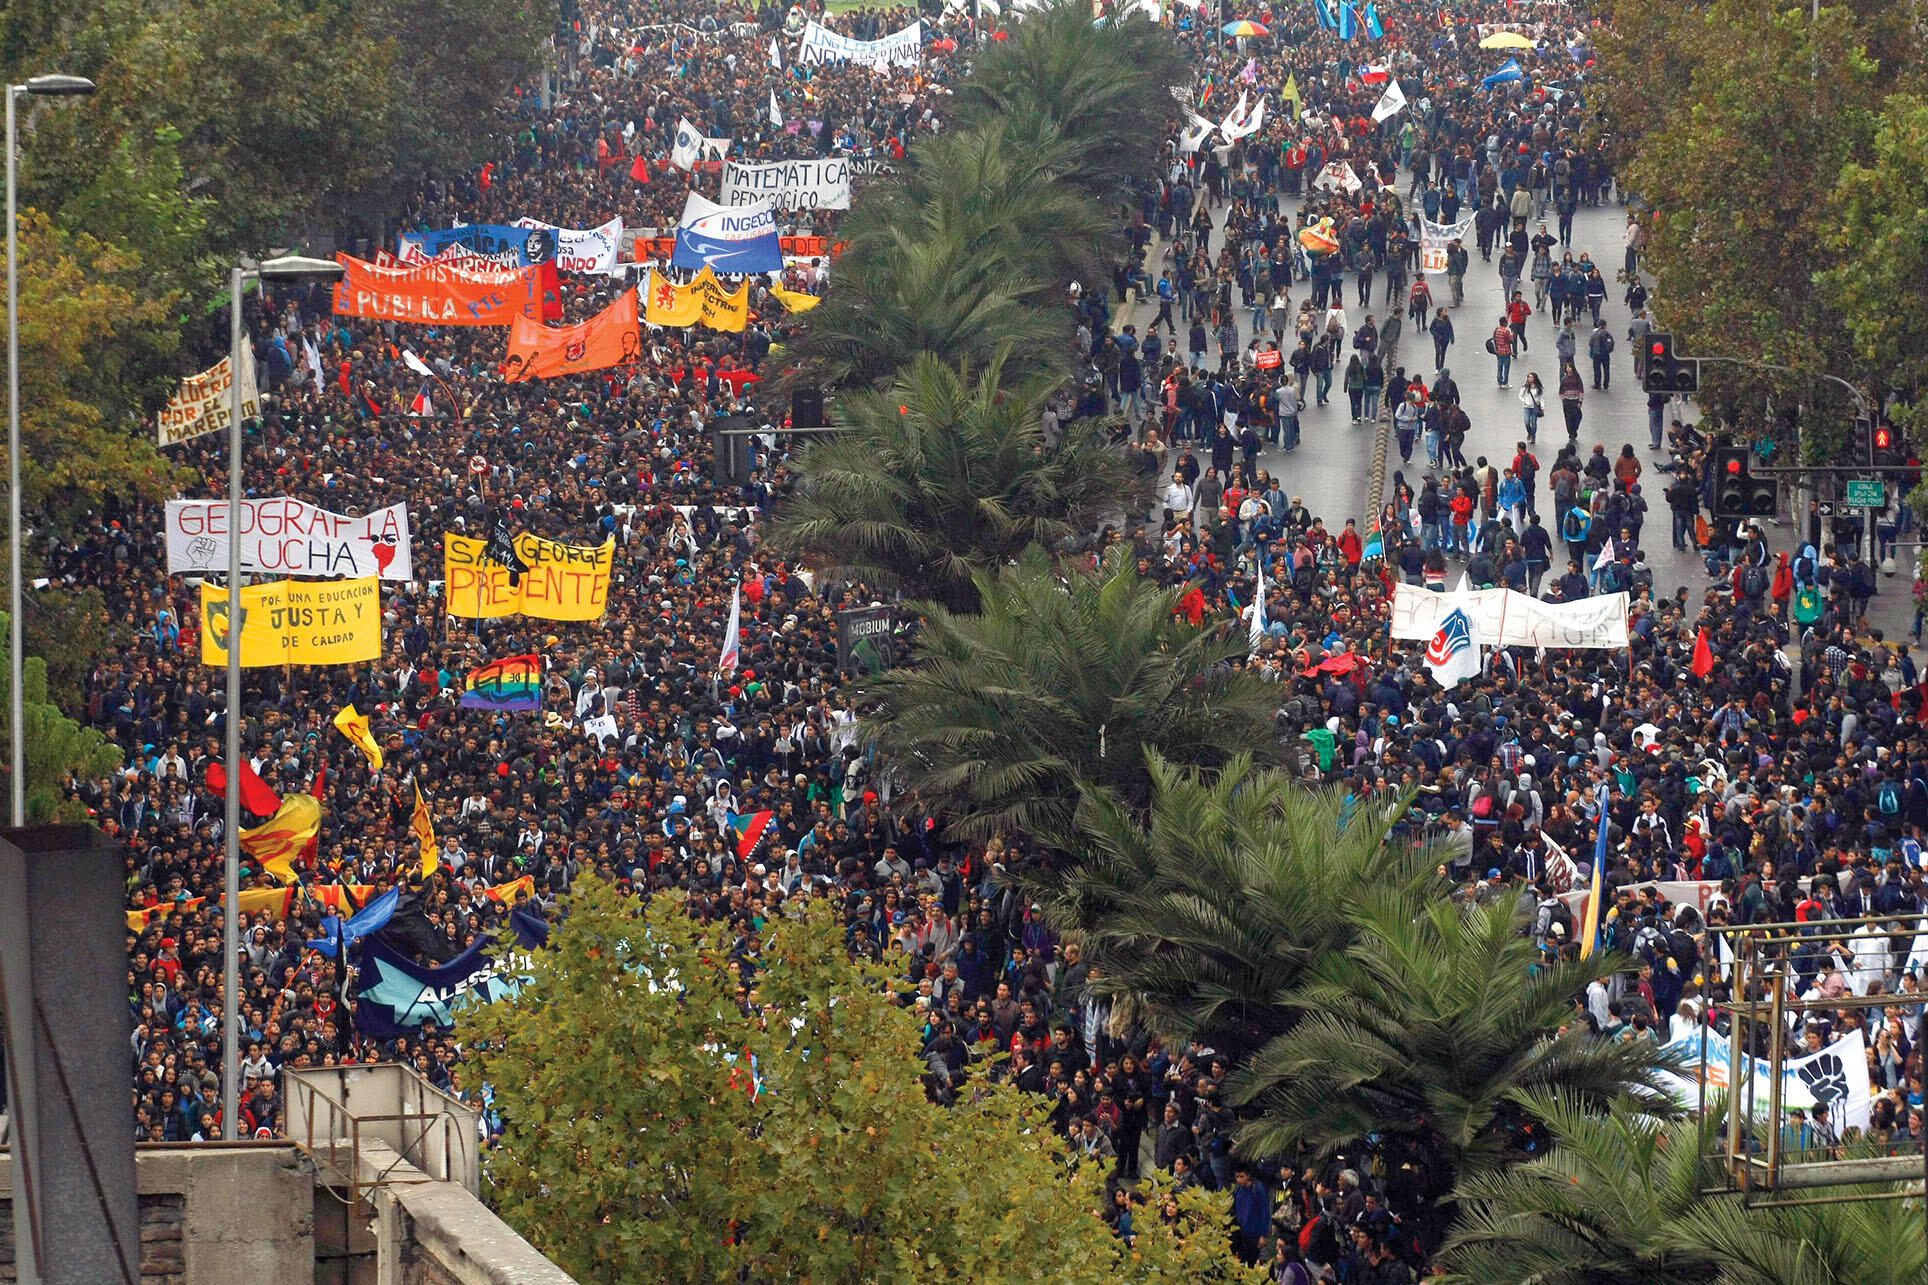 Differences over educational policy led students to Chile’s streets again in 2013. (Photo by Luis Hidalgo/AP Photo.)